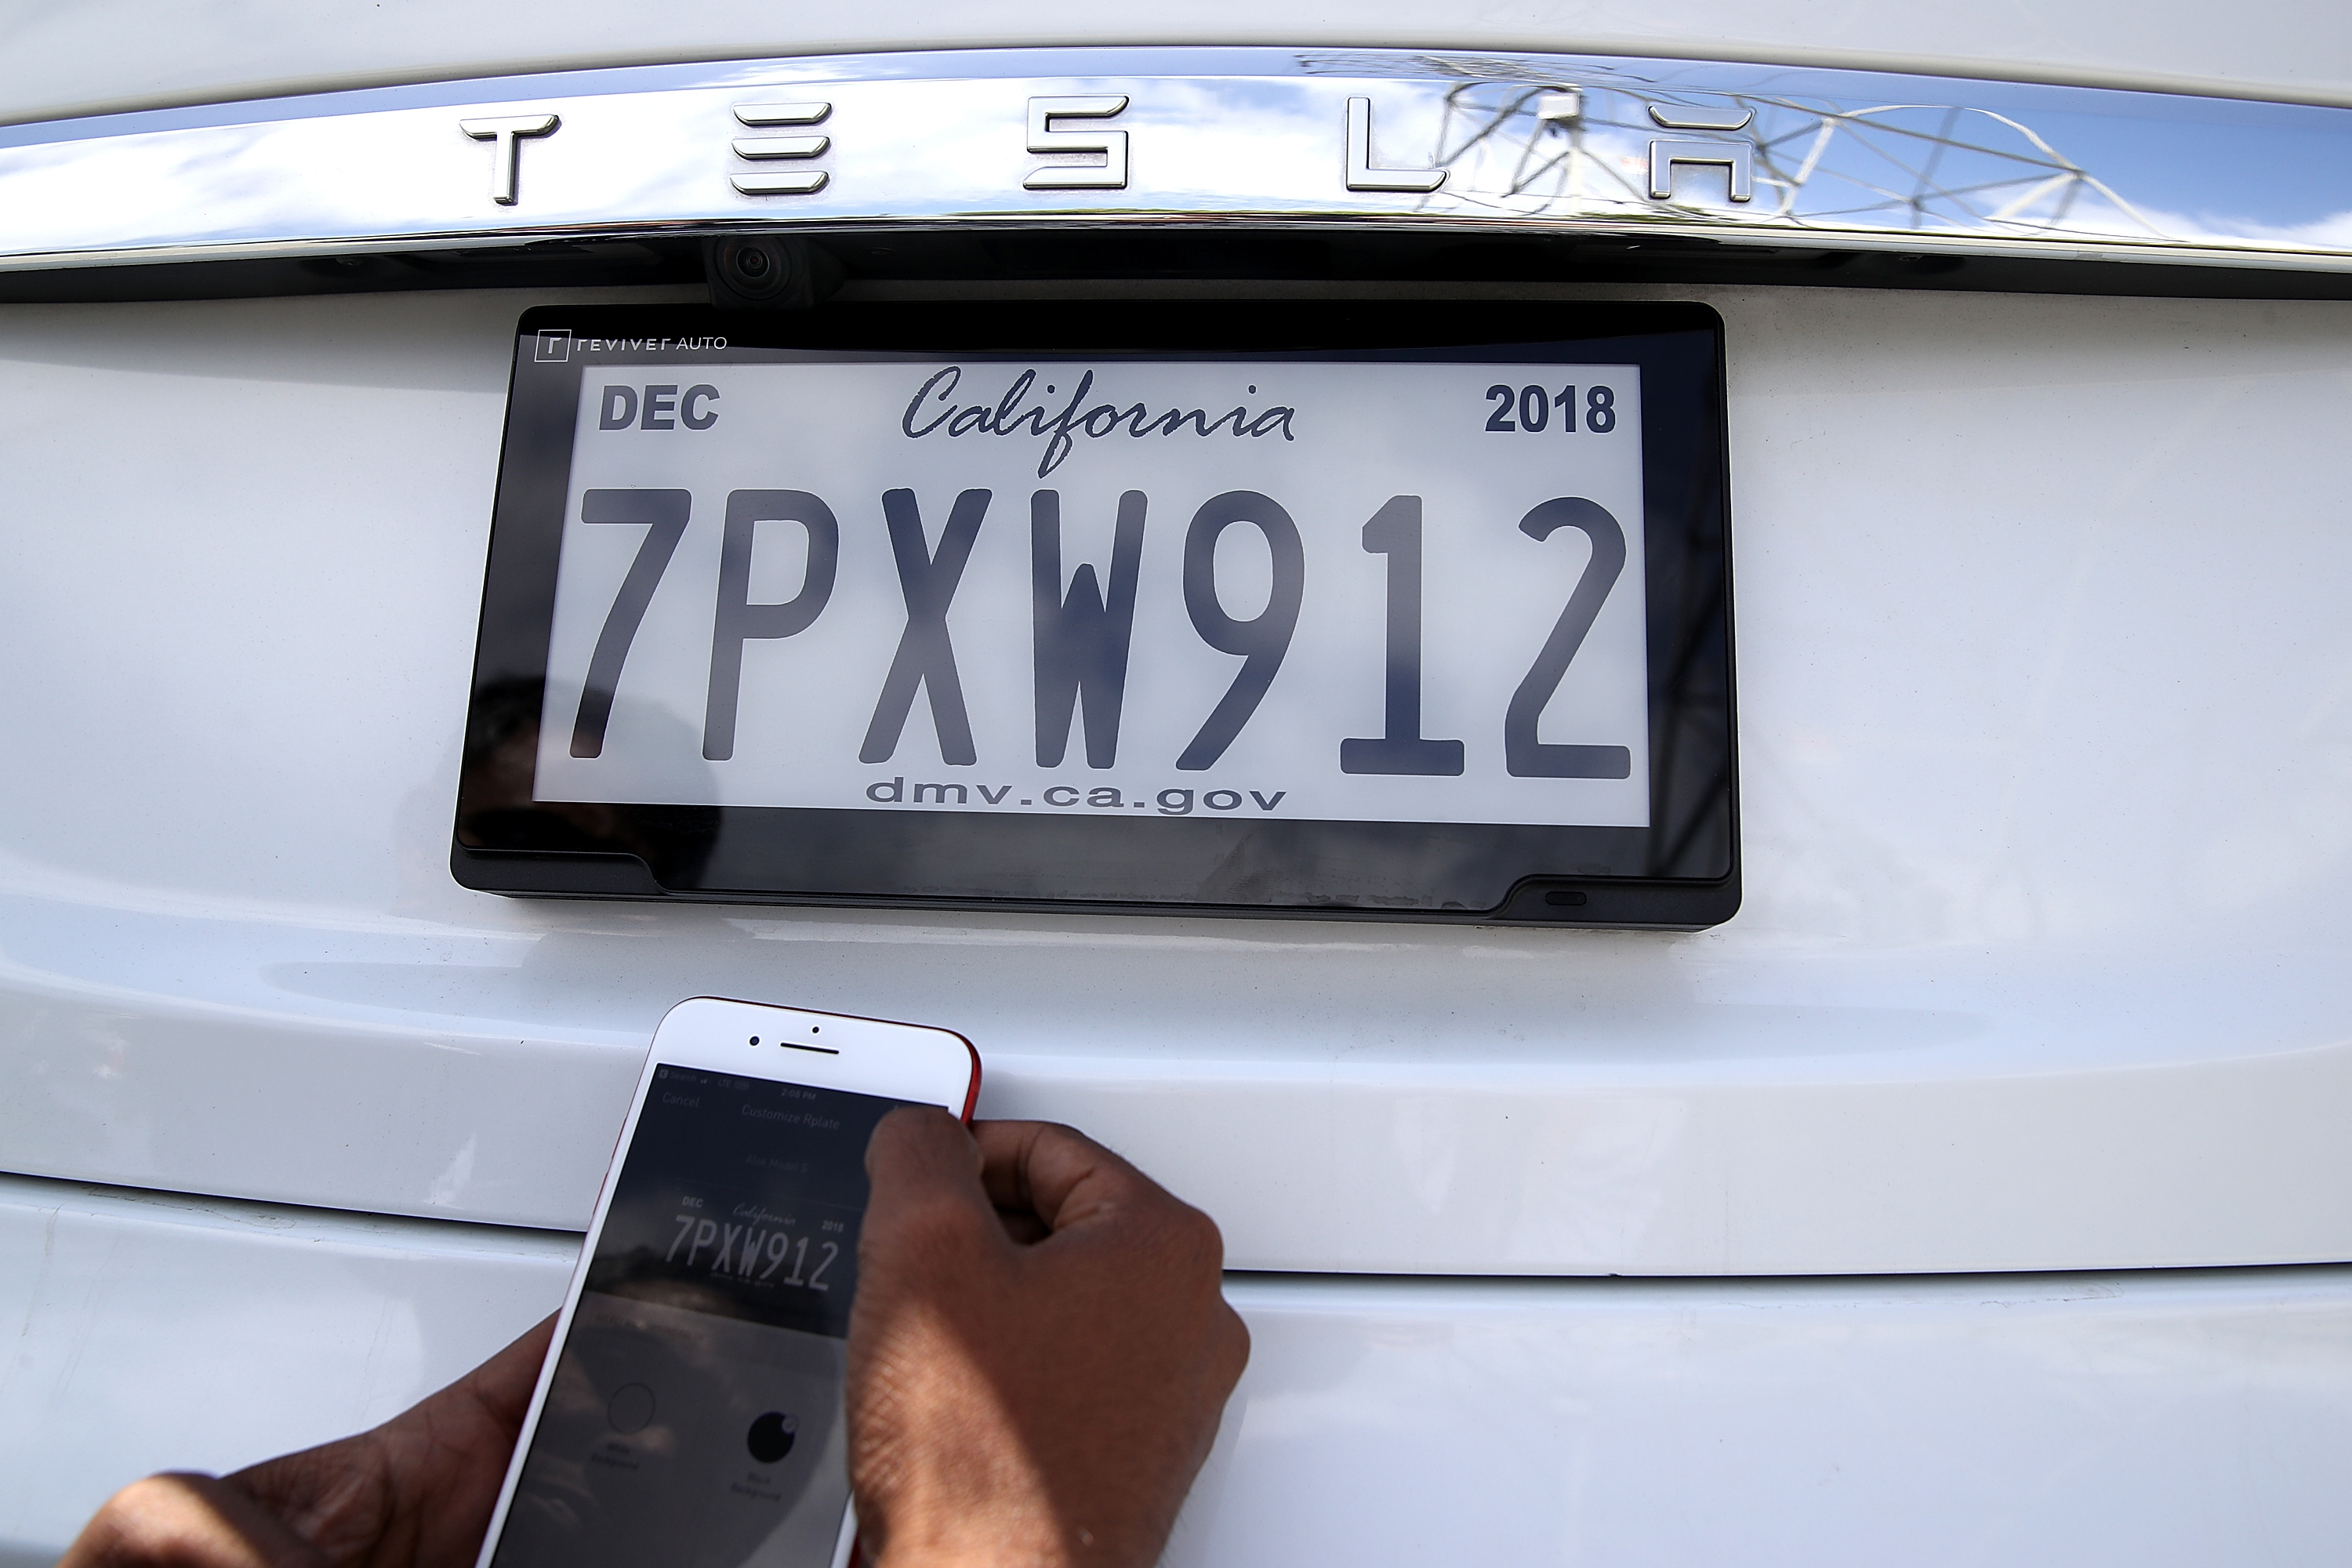 A person is holding a smartphone, matching a digital car plate on a white Tesla with "TESLA" logo above.